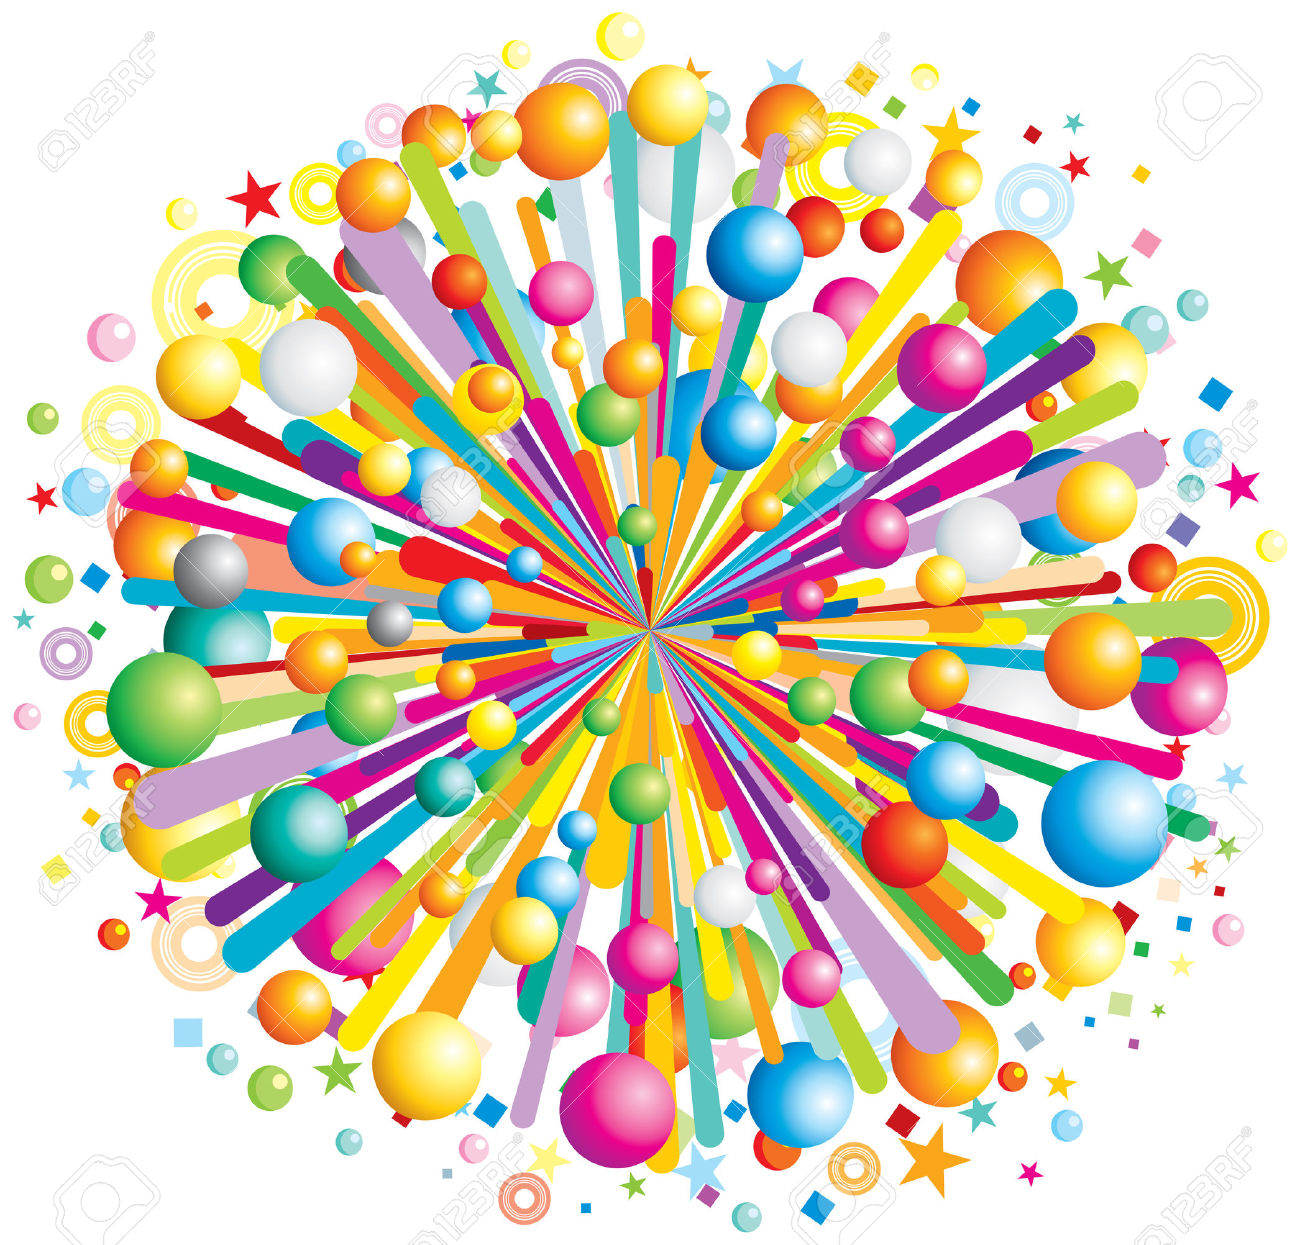 Multicolor Cartoon Burst Stock Photo, Picture And Royalty Free.